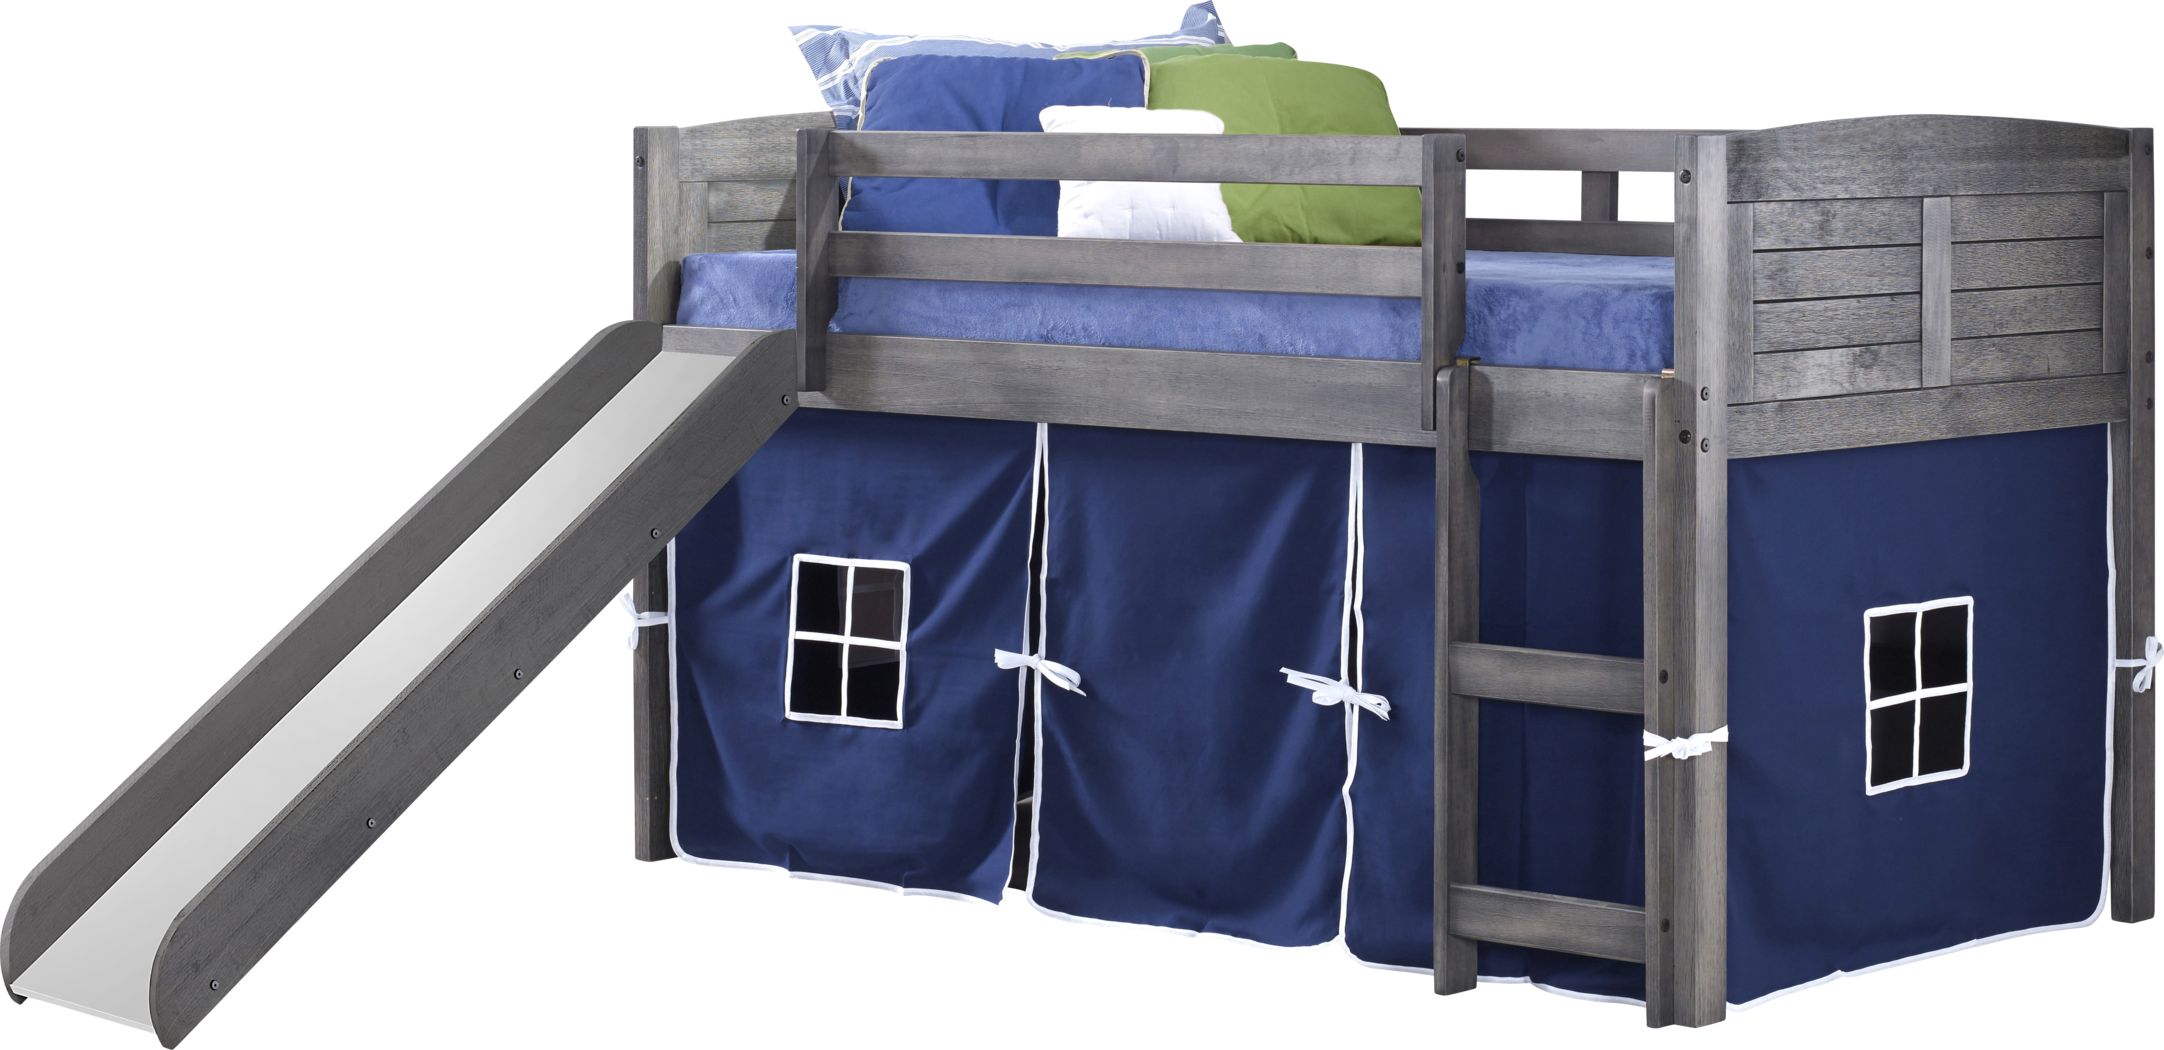 Bunk Beds For Kids, Bunk Beds For Boys